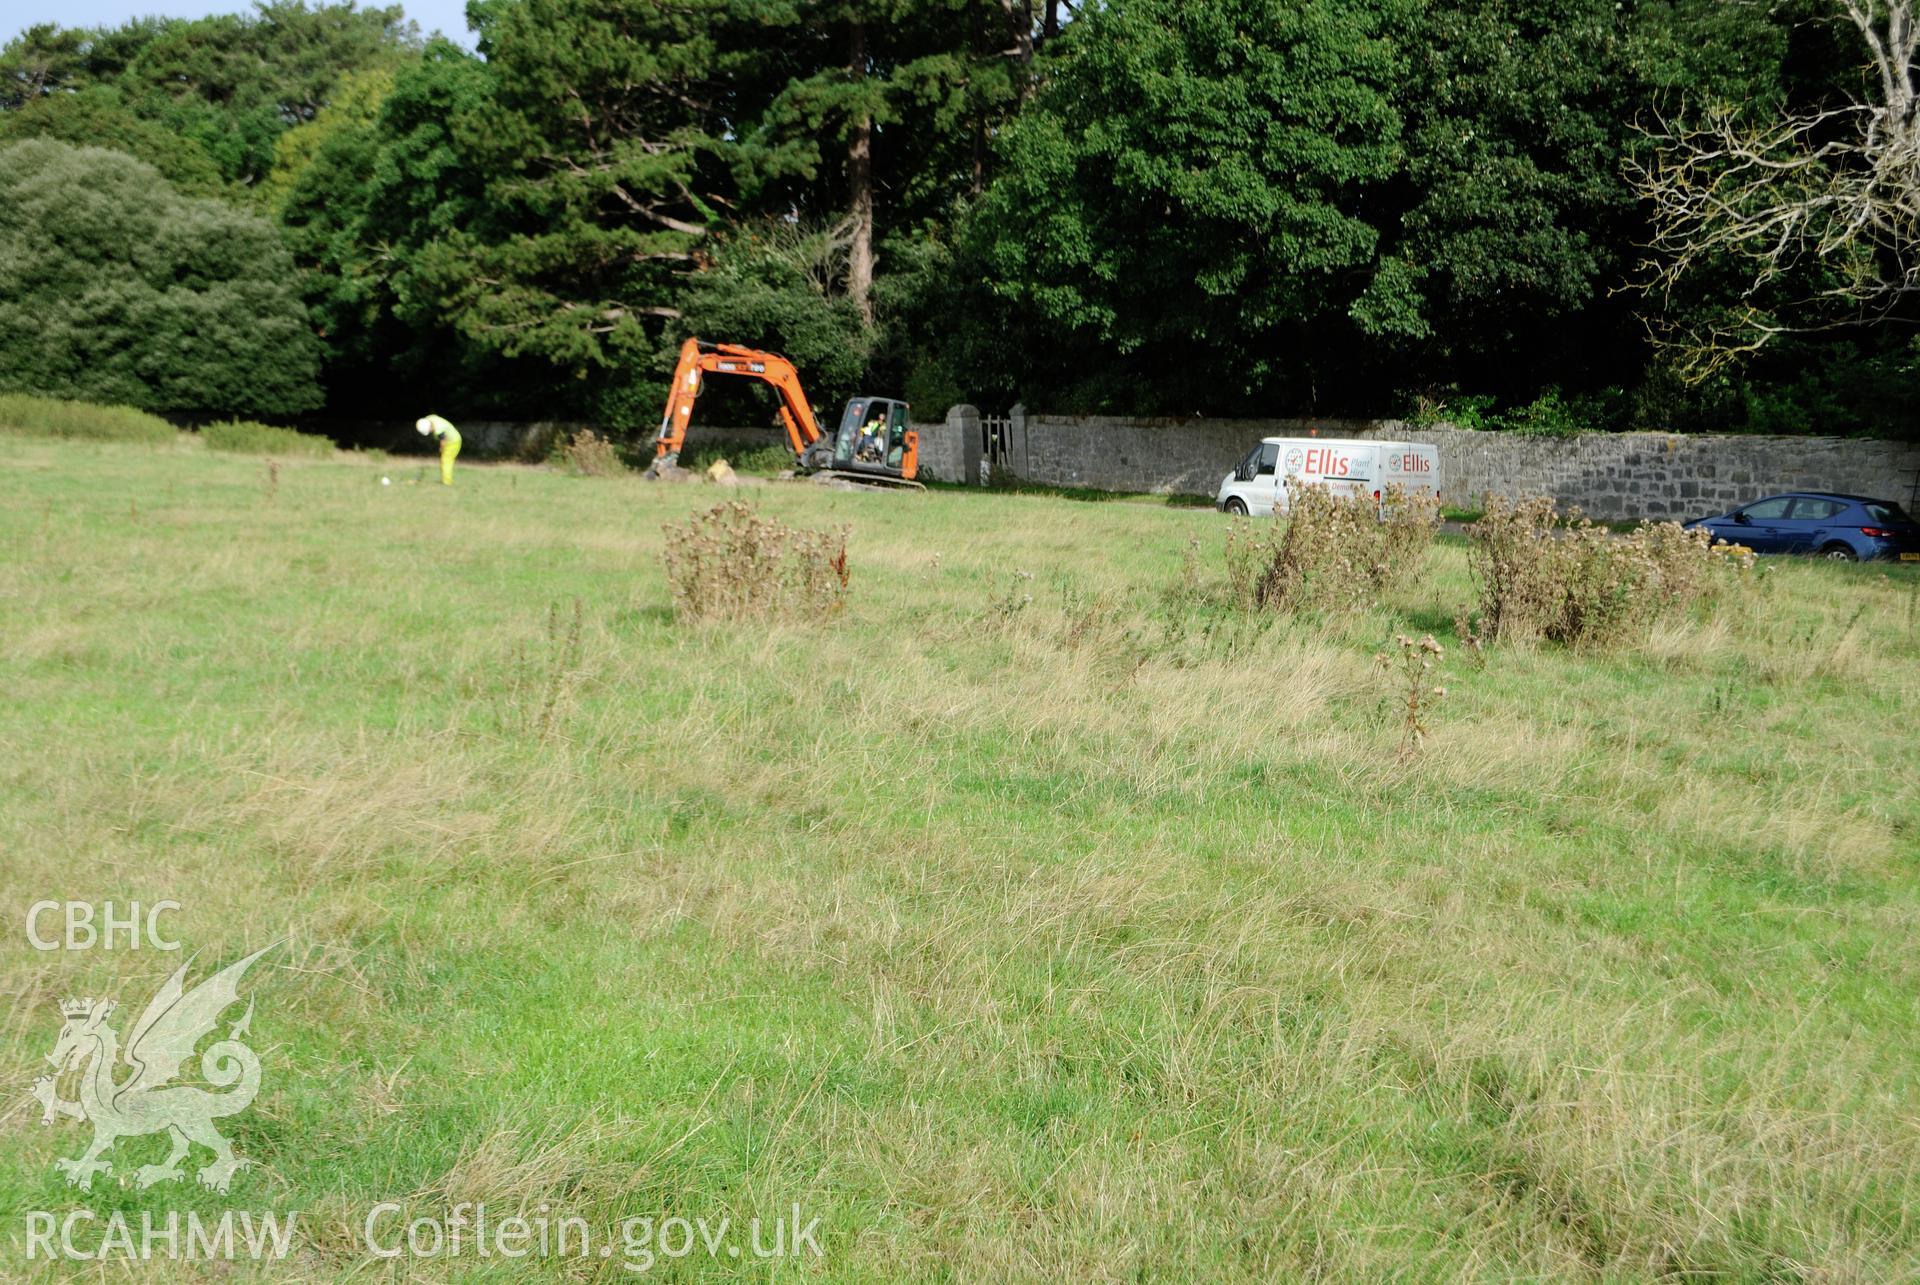 Wider view from the south east of the evaluation area, pre-excavation. Photographed during archaeological evaluation of Kinmel Park, Abergele, conducted by Gwynedd Archaeological Trust on 22nd August 2018. Project no. 2571.